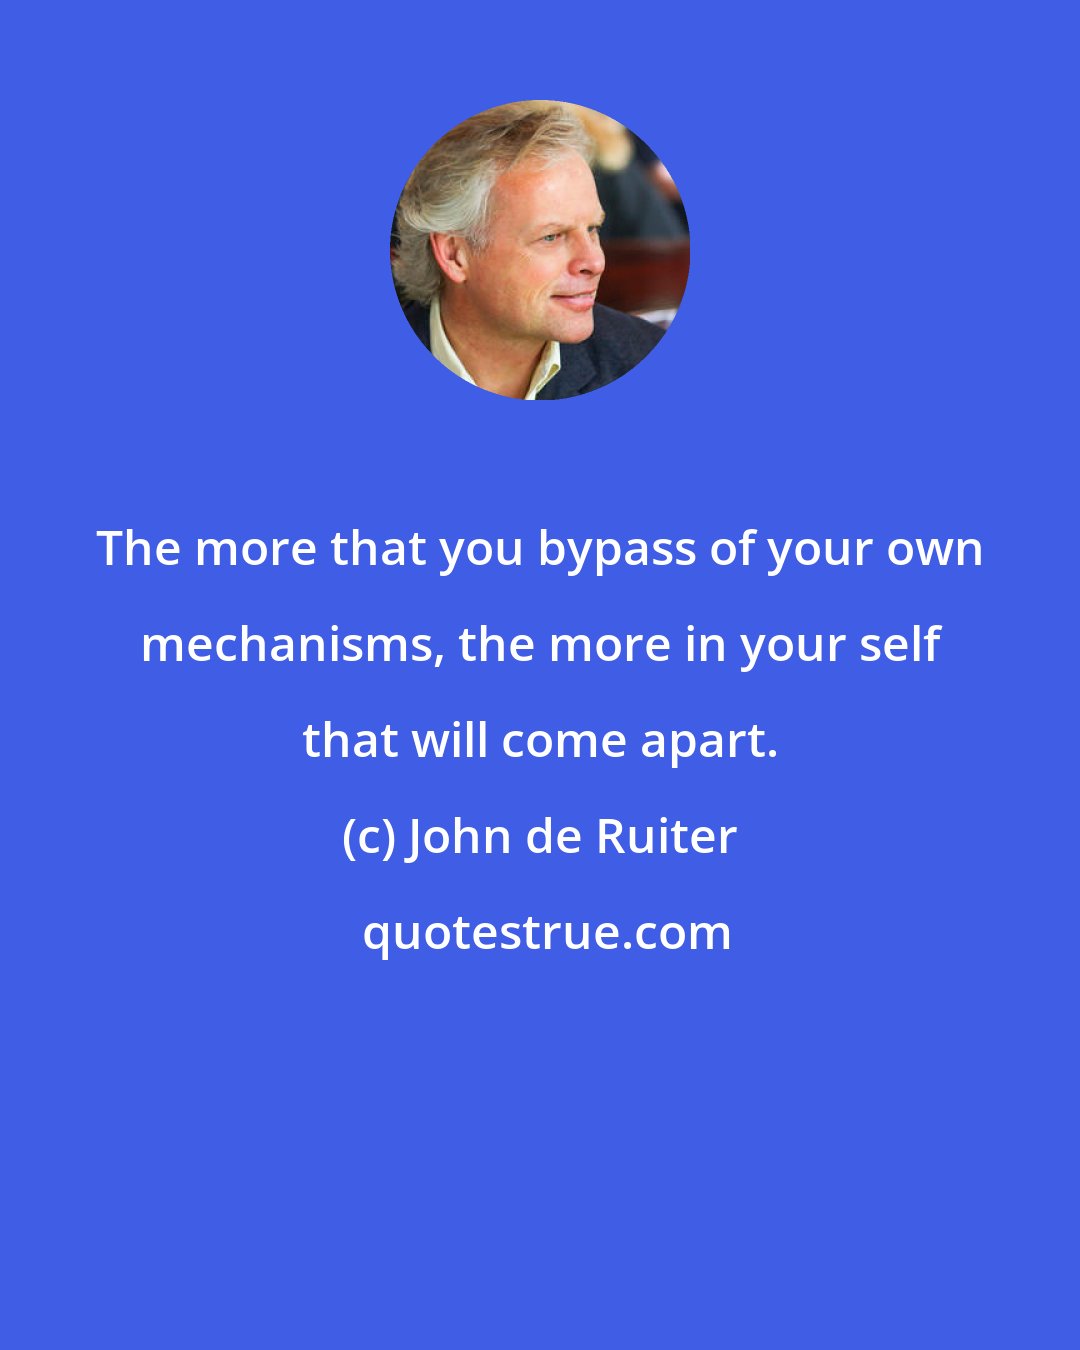 John de Ruiter: The more that you bypass of your own mechanisms, the more in your self that will come apart.